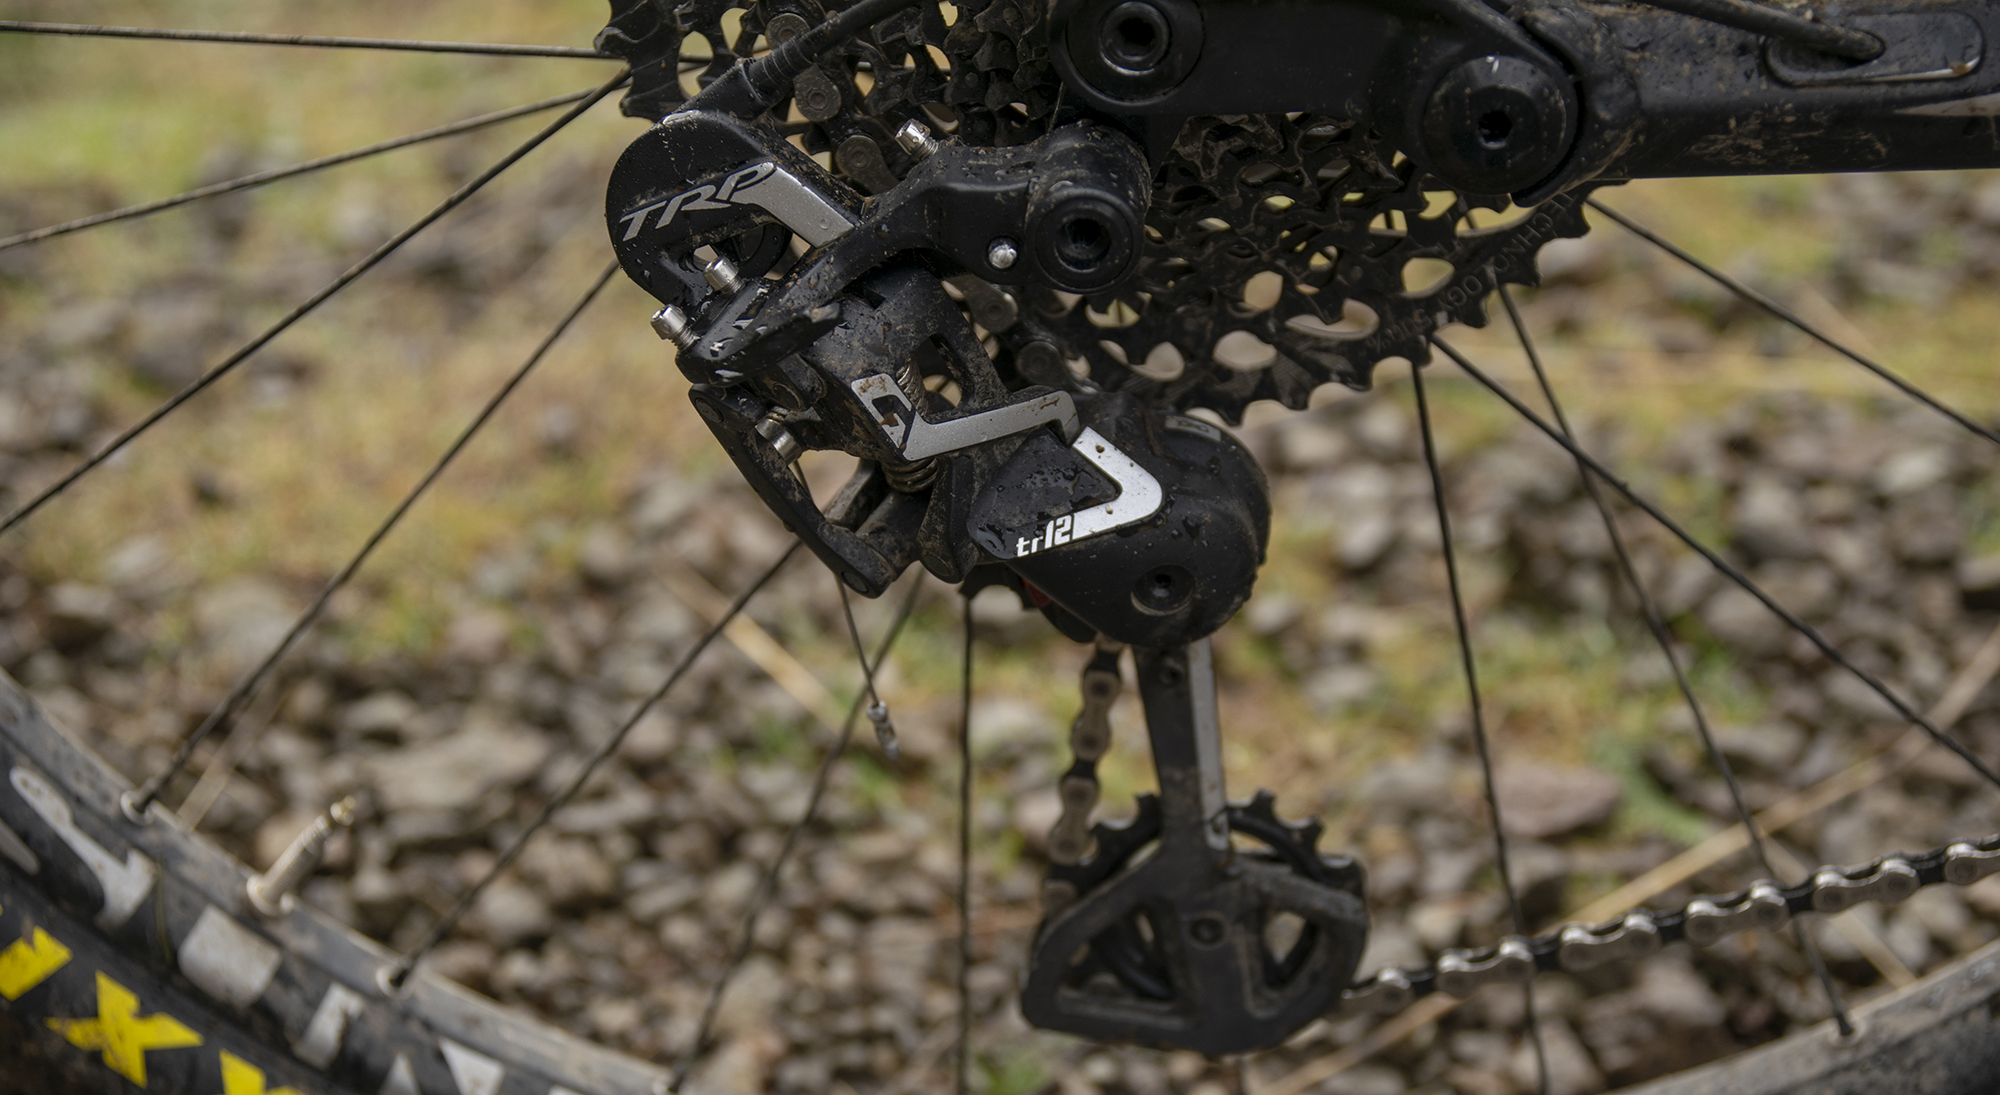 David Golay reviews the TRP TR12 Drivetrain for Blister